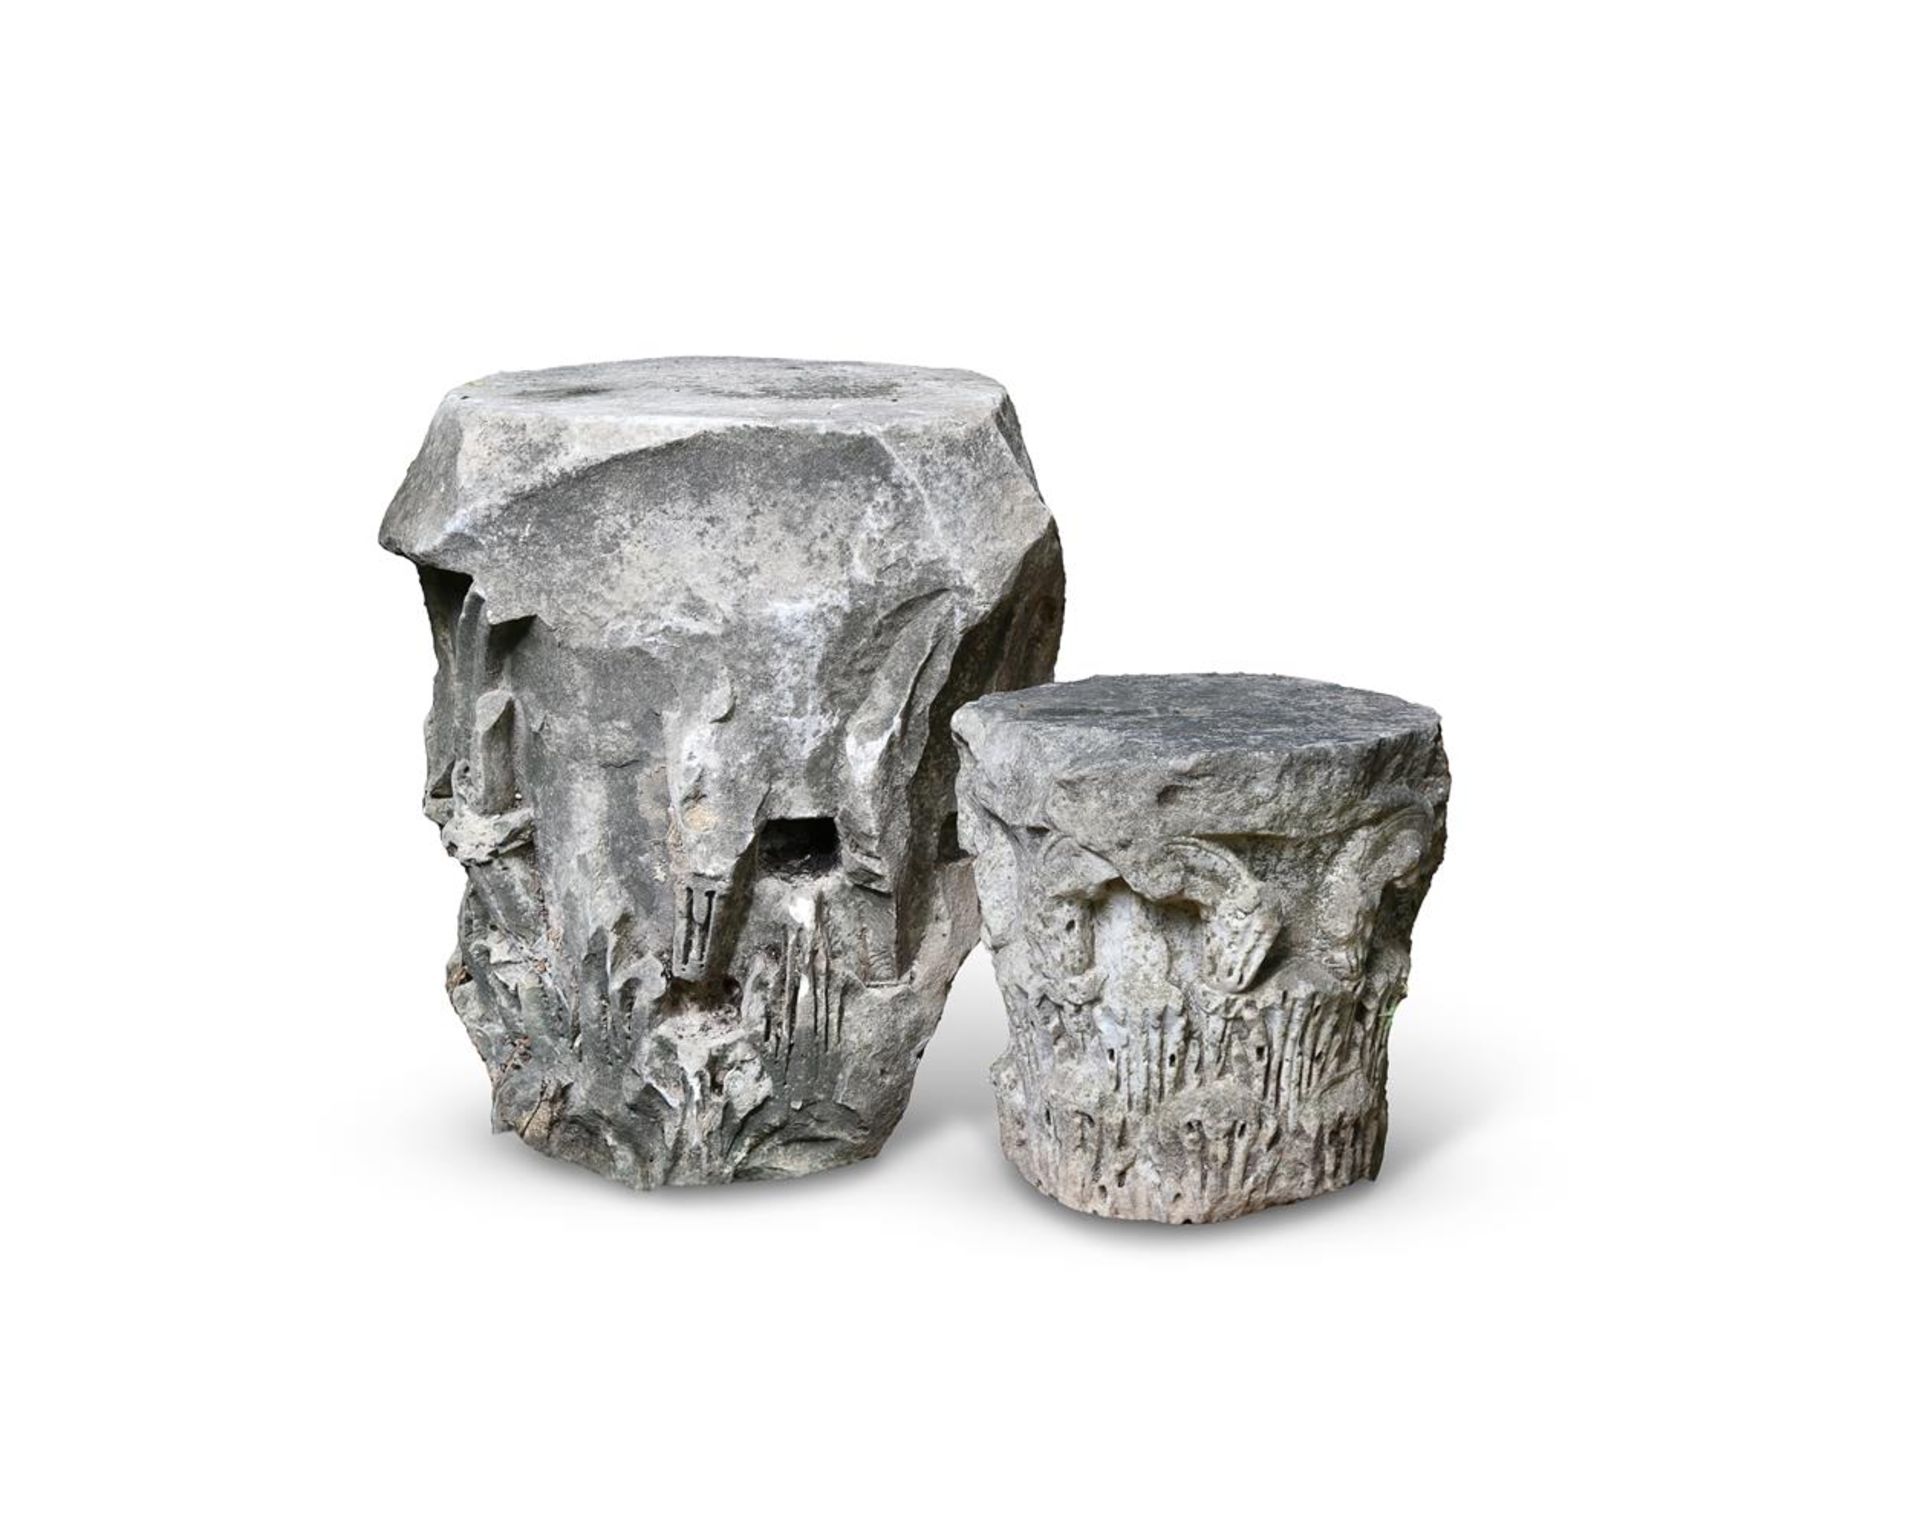 TWO CARVED STONE CAPITALS, NORTH EUROPEAN, POSSIBLY ROMANESQUE